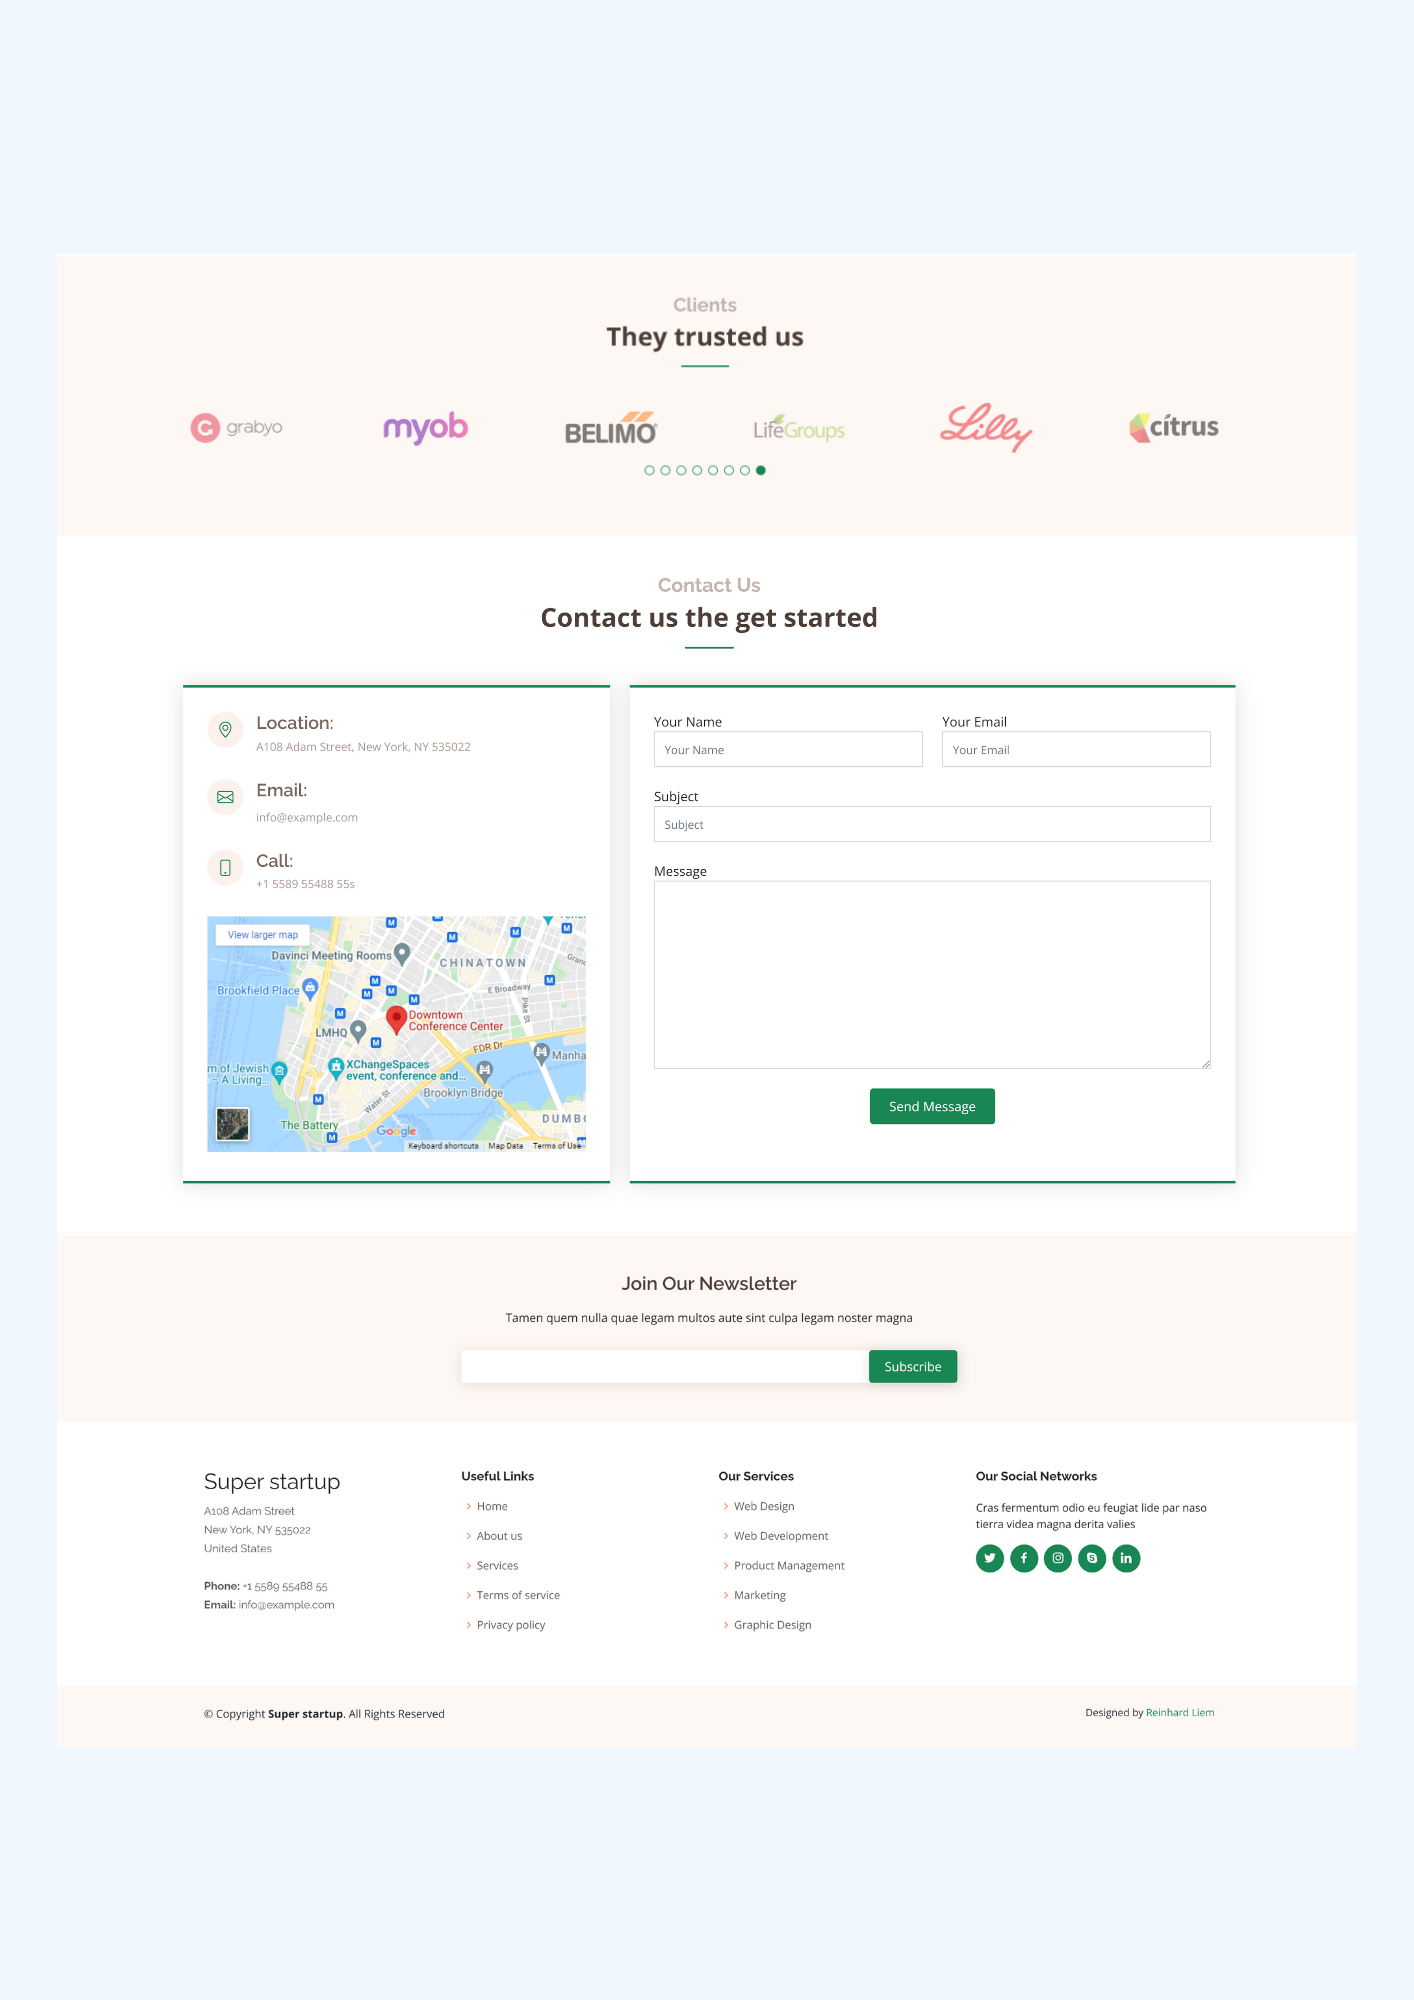 Super Startup is a modern Bootstrap template for your business, or startup company. We have included best practices and the latest trends in web development. Proudly designed by Reinhard Liem.